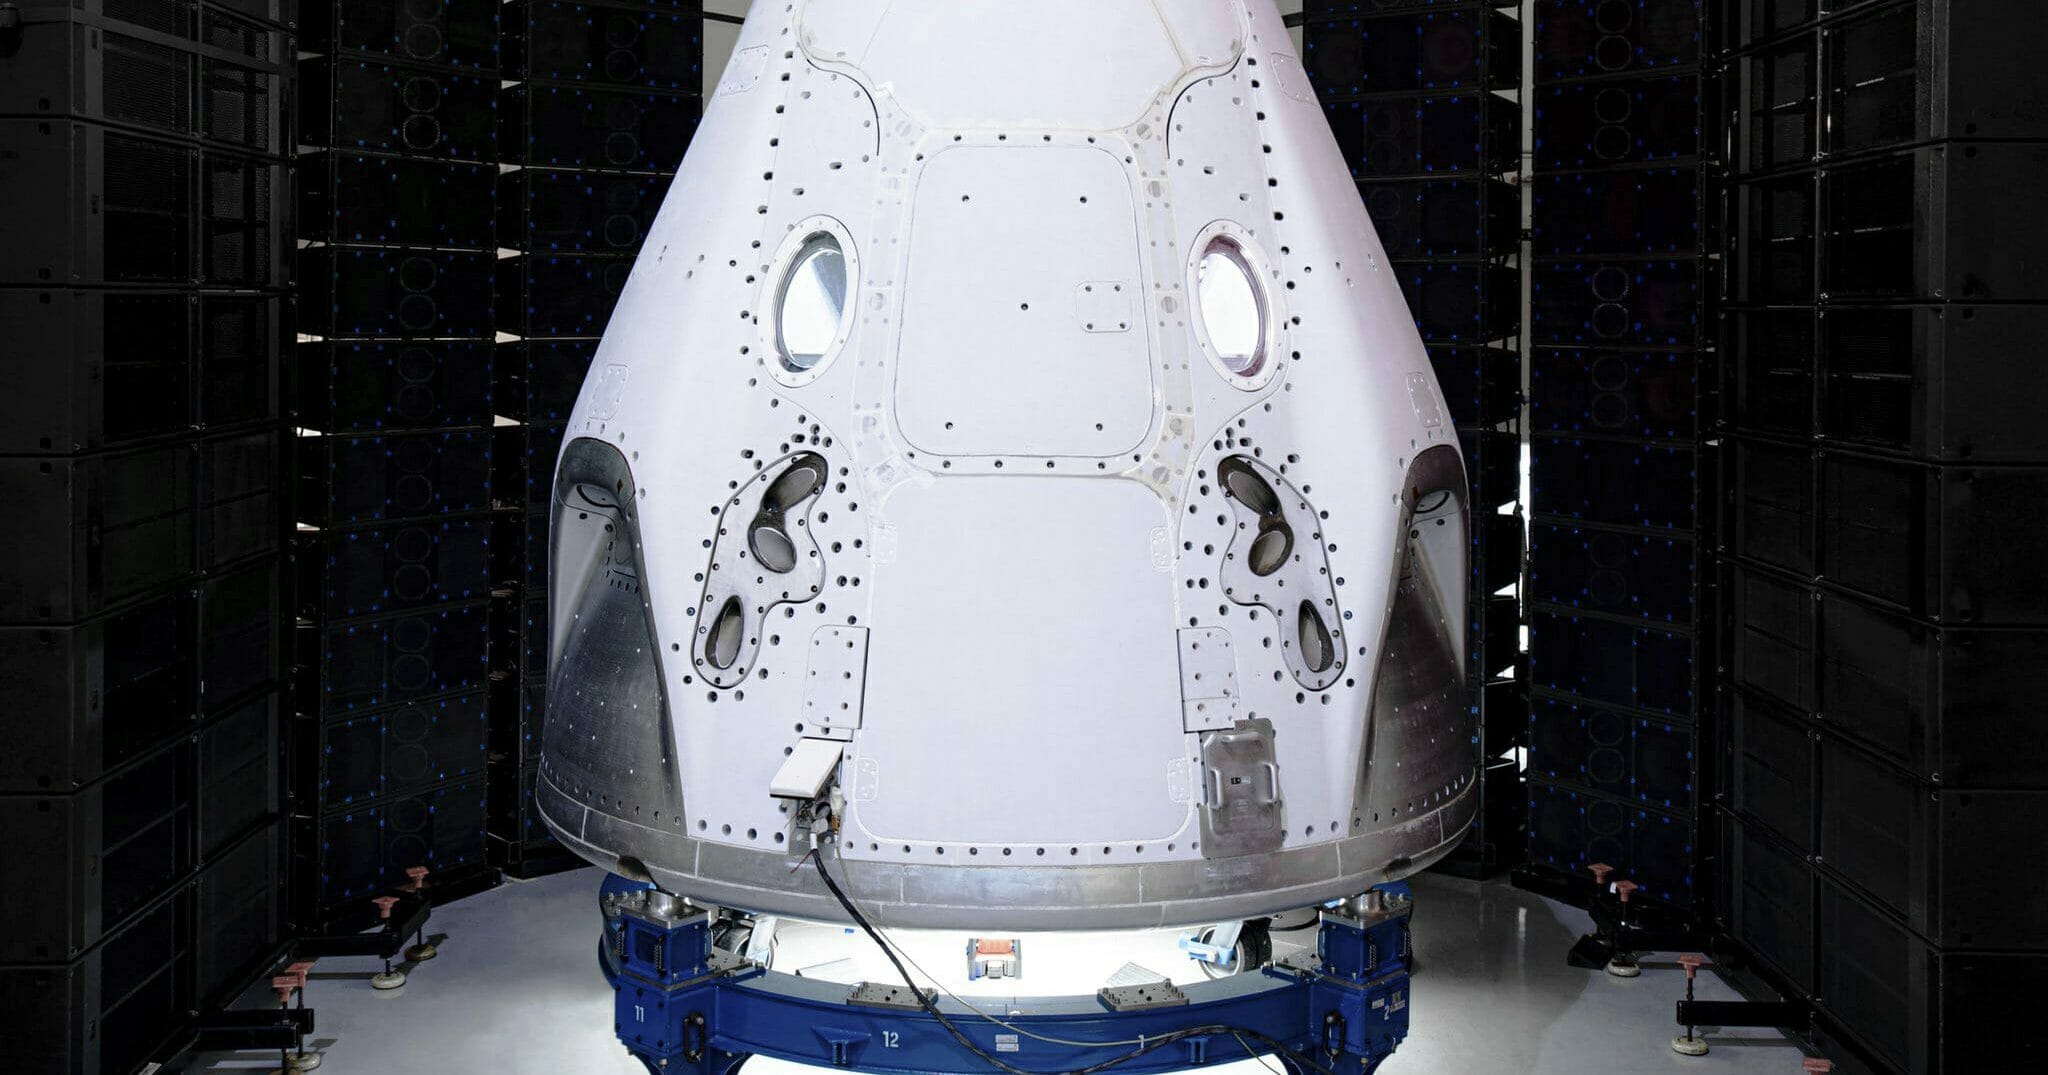 This undated photo made available by SpaceX in February 2020 shows the Crew Dragon spacecraft undergoing acoustic testing in Florida. On Feb. 18, 2020, SpaceX announced it is working with Space Adventures Inc. to take tourists into a high orbit. Ticket prices aren't being divulged but are likely to be in the millions of dollars.